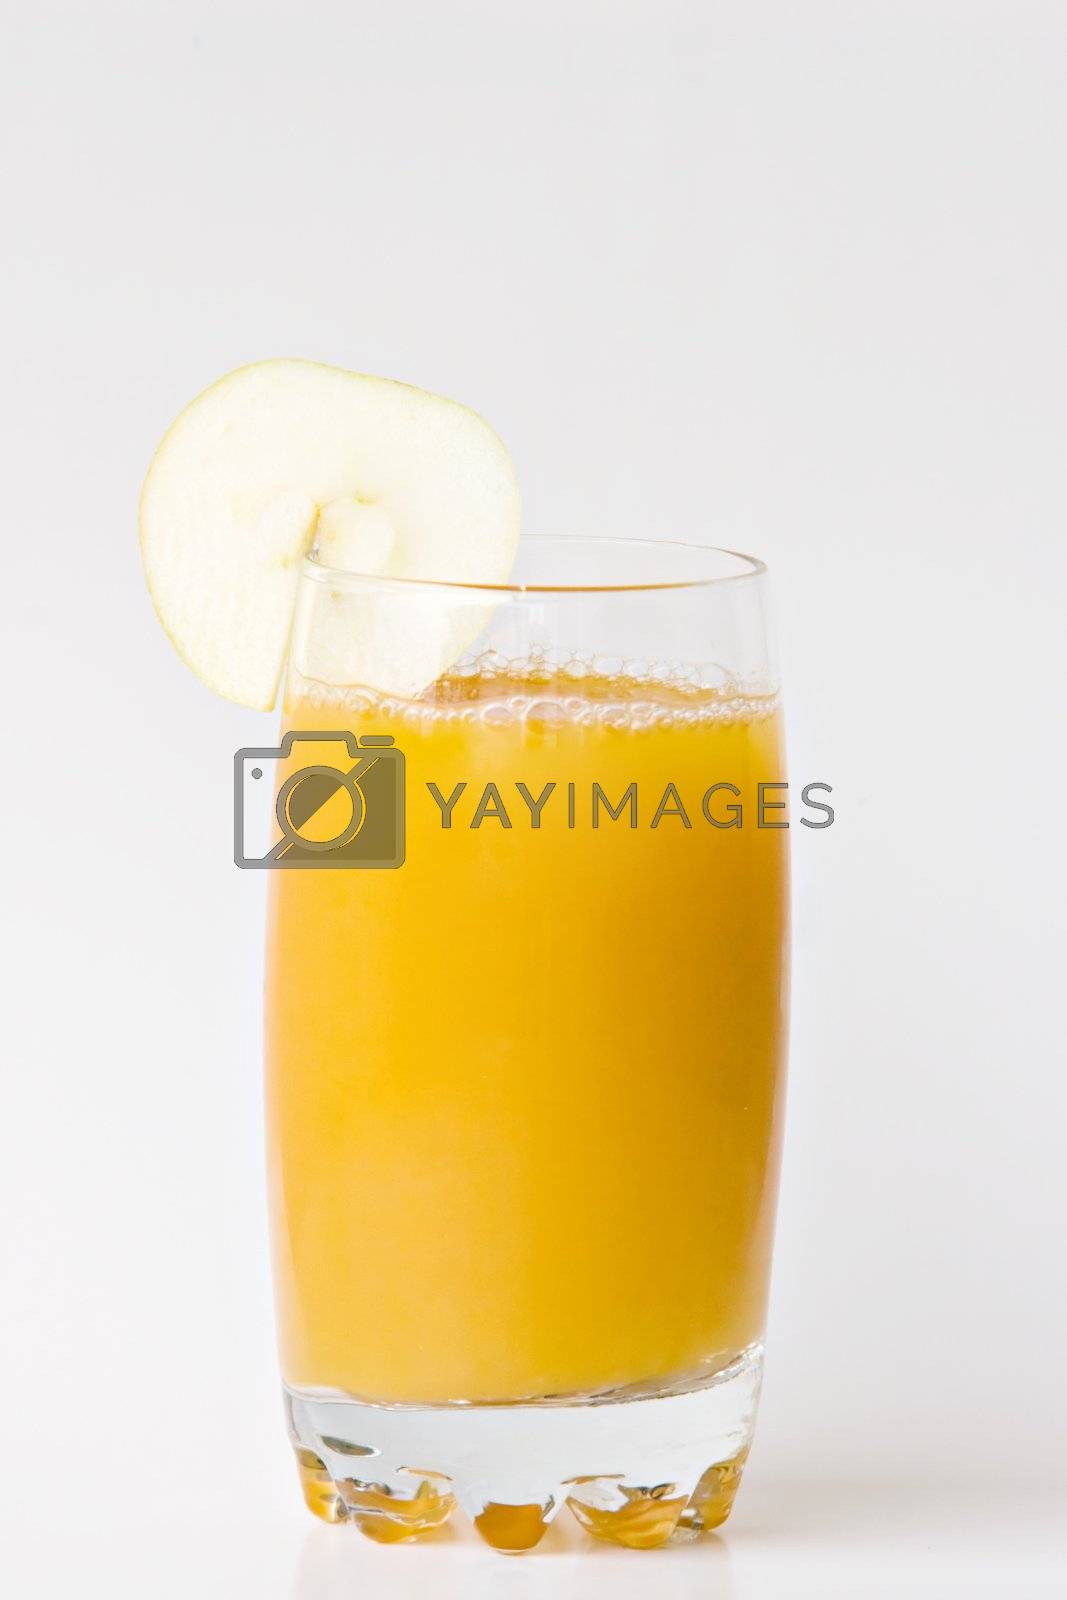 Royalty free image of Juice by ajn